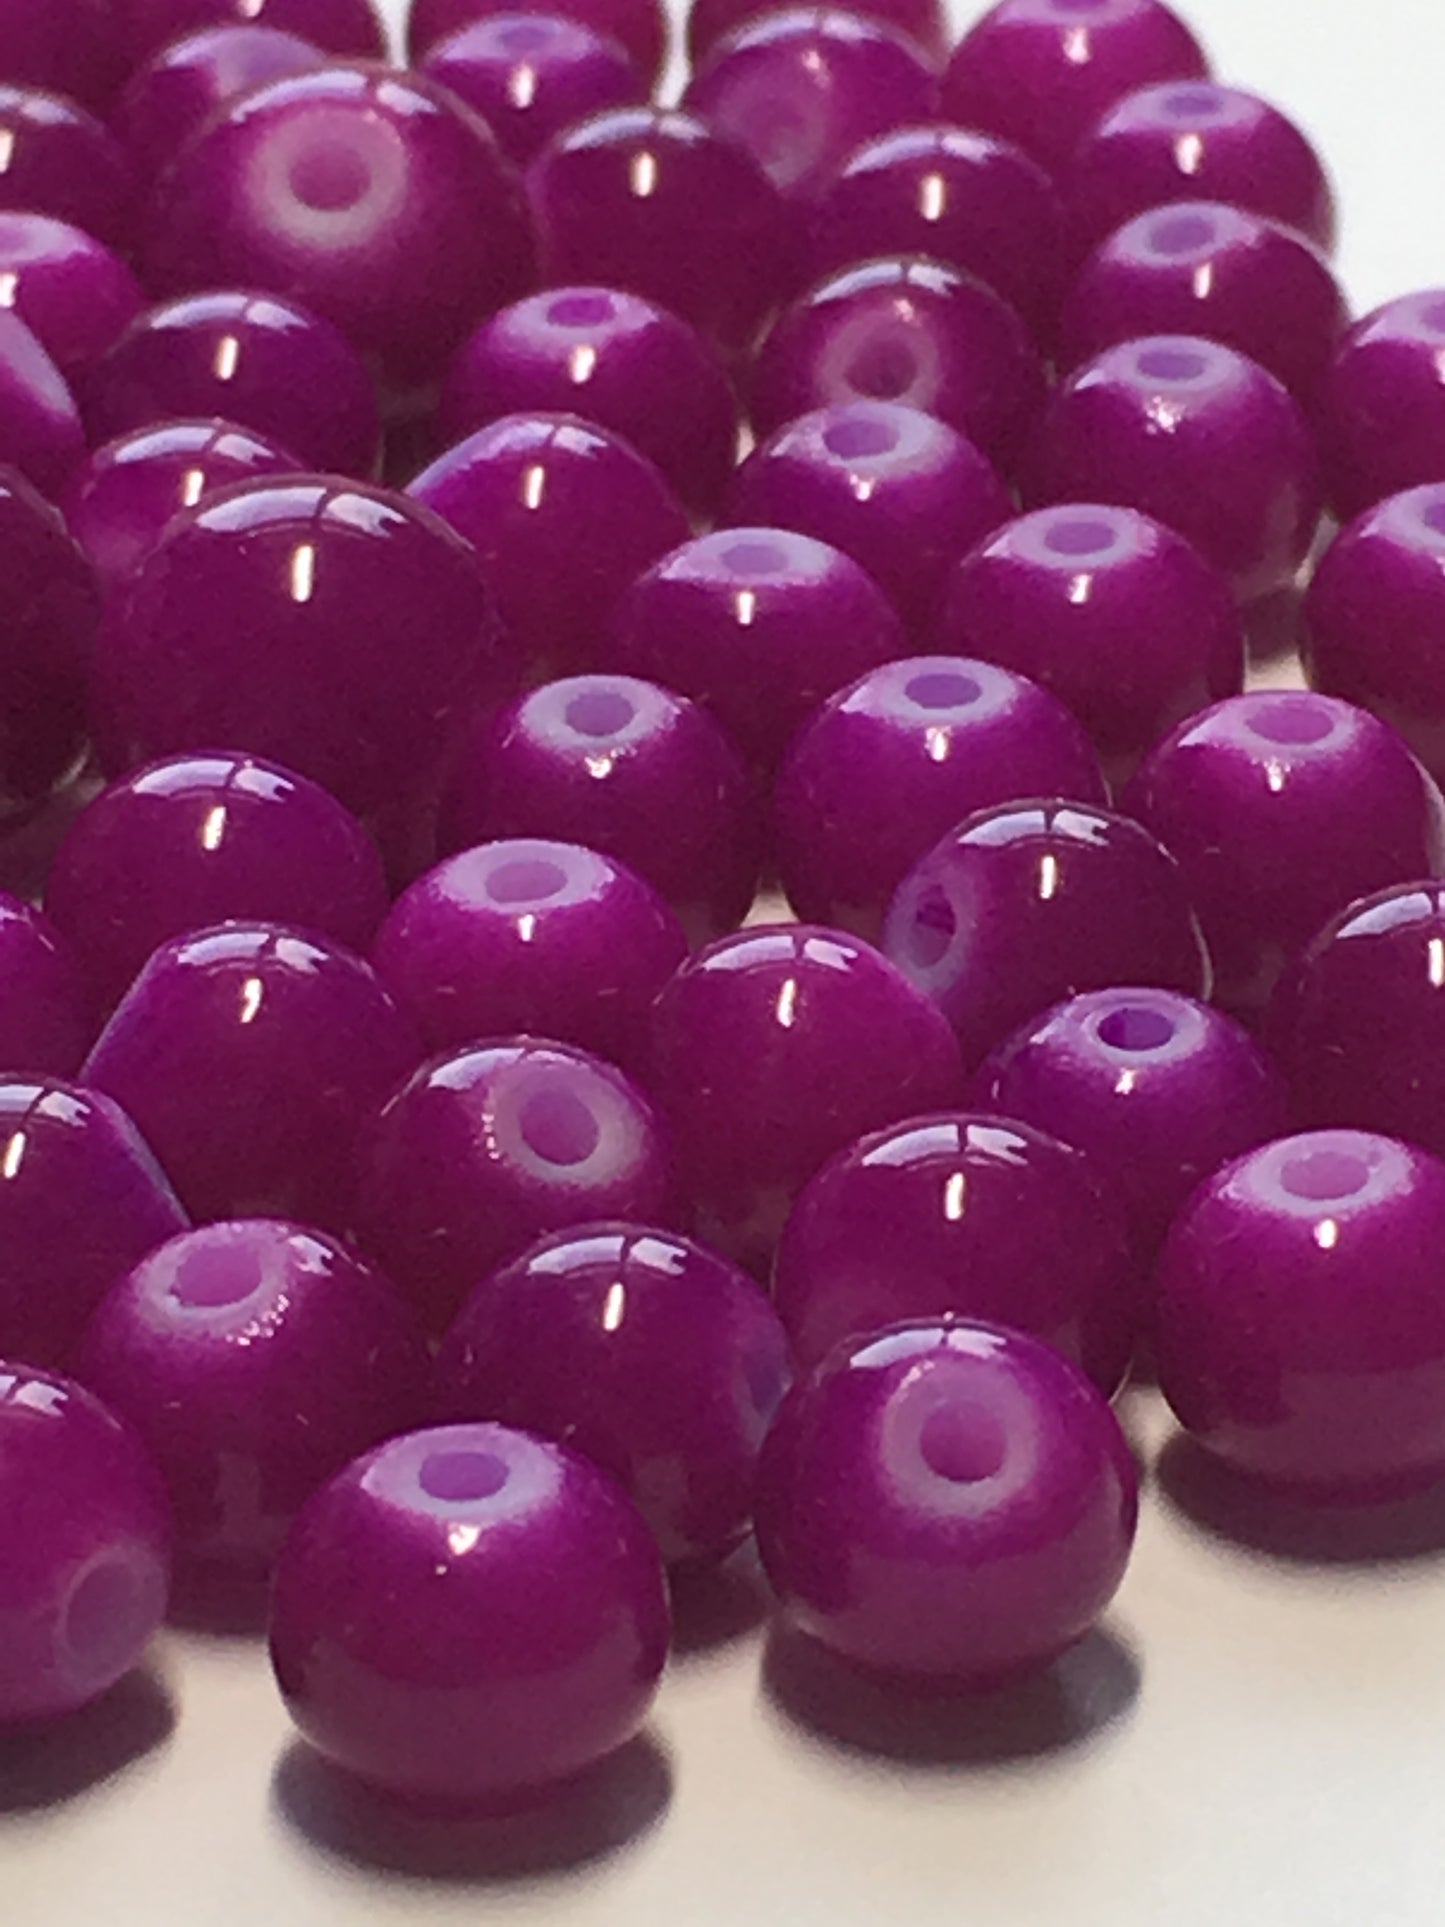 Neon Purple Painted Glass Round Beads, 5 and 7 mm, 43 Beads